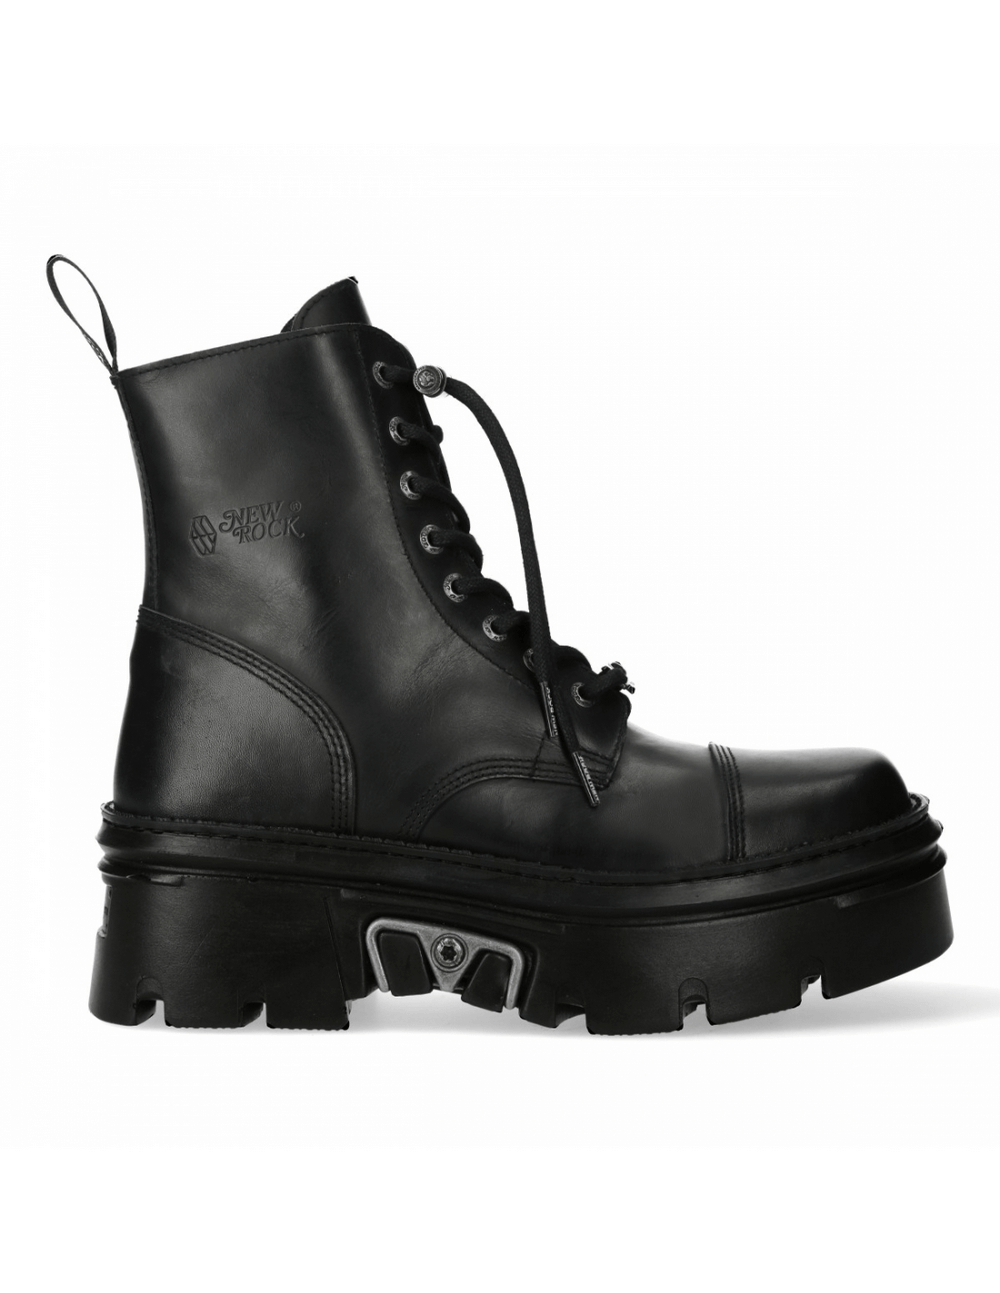 NEW ROCK Punk Style Leather Ankle Boots with Platform